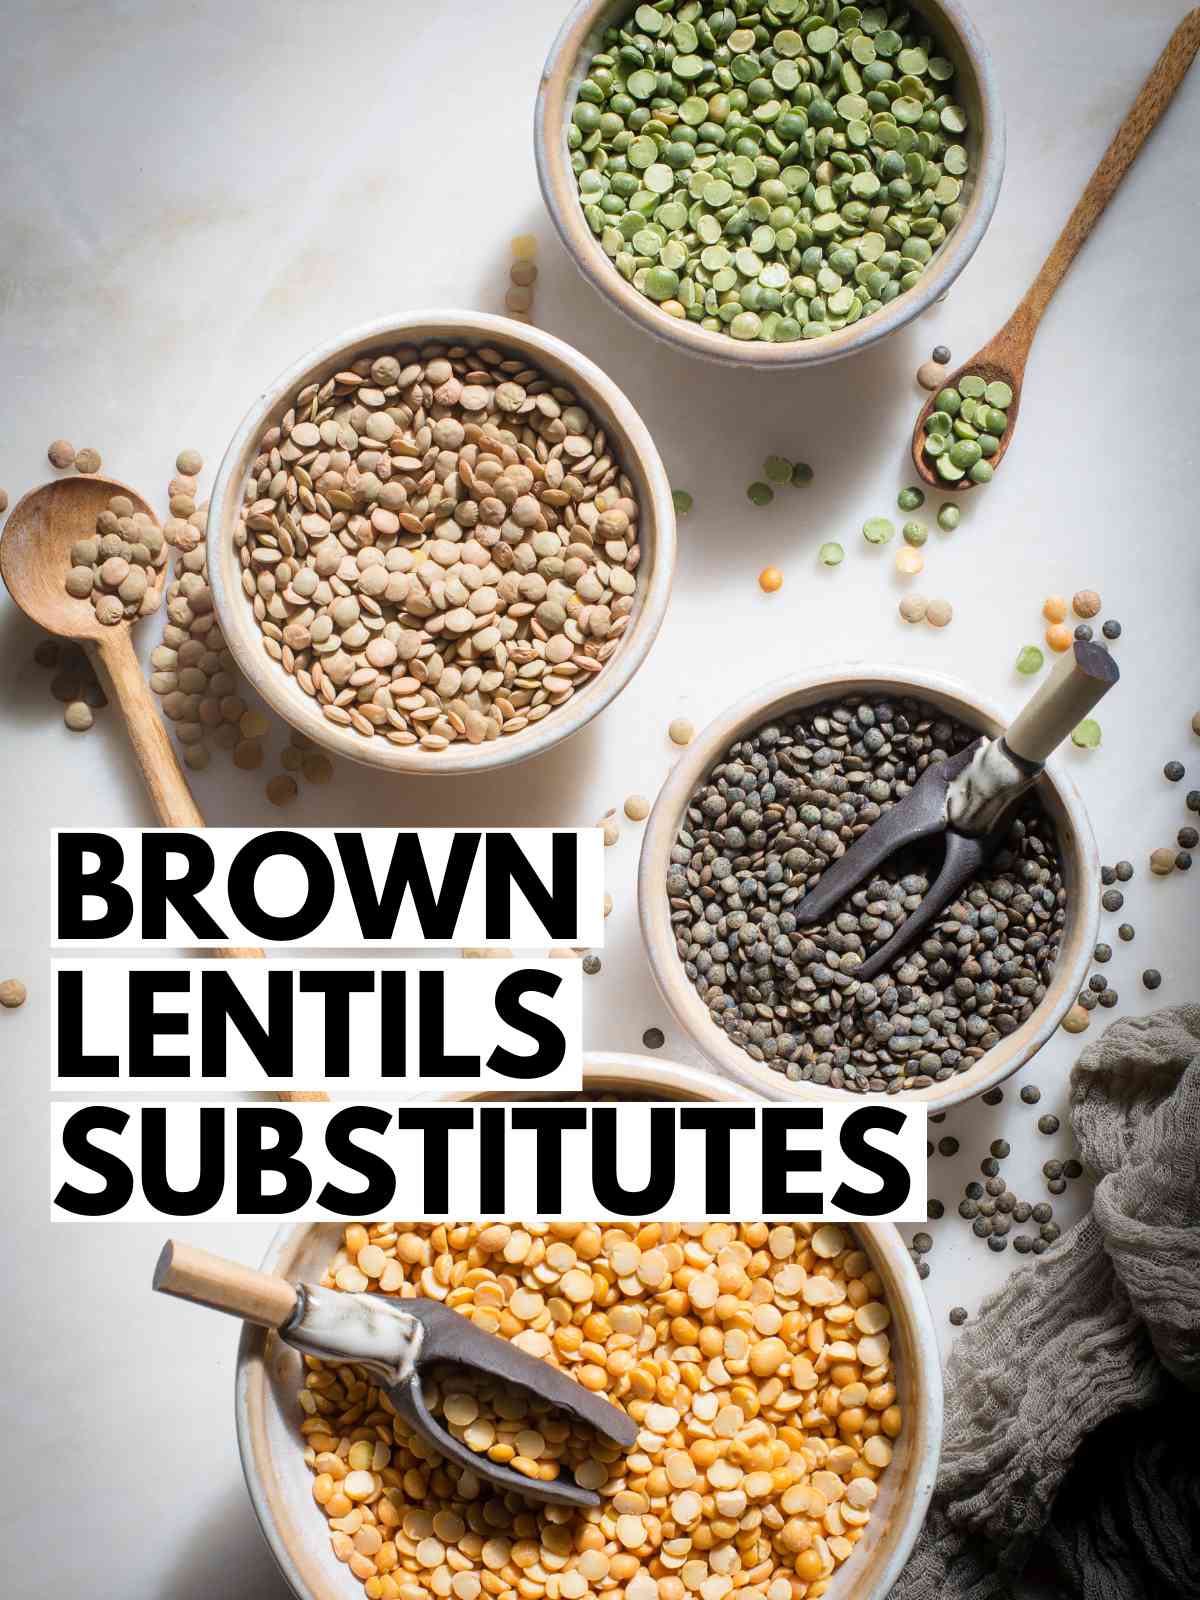 Different lentils placed in bowls as brown lentils substitute.